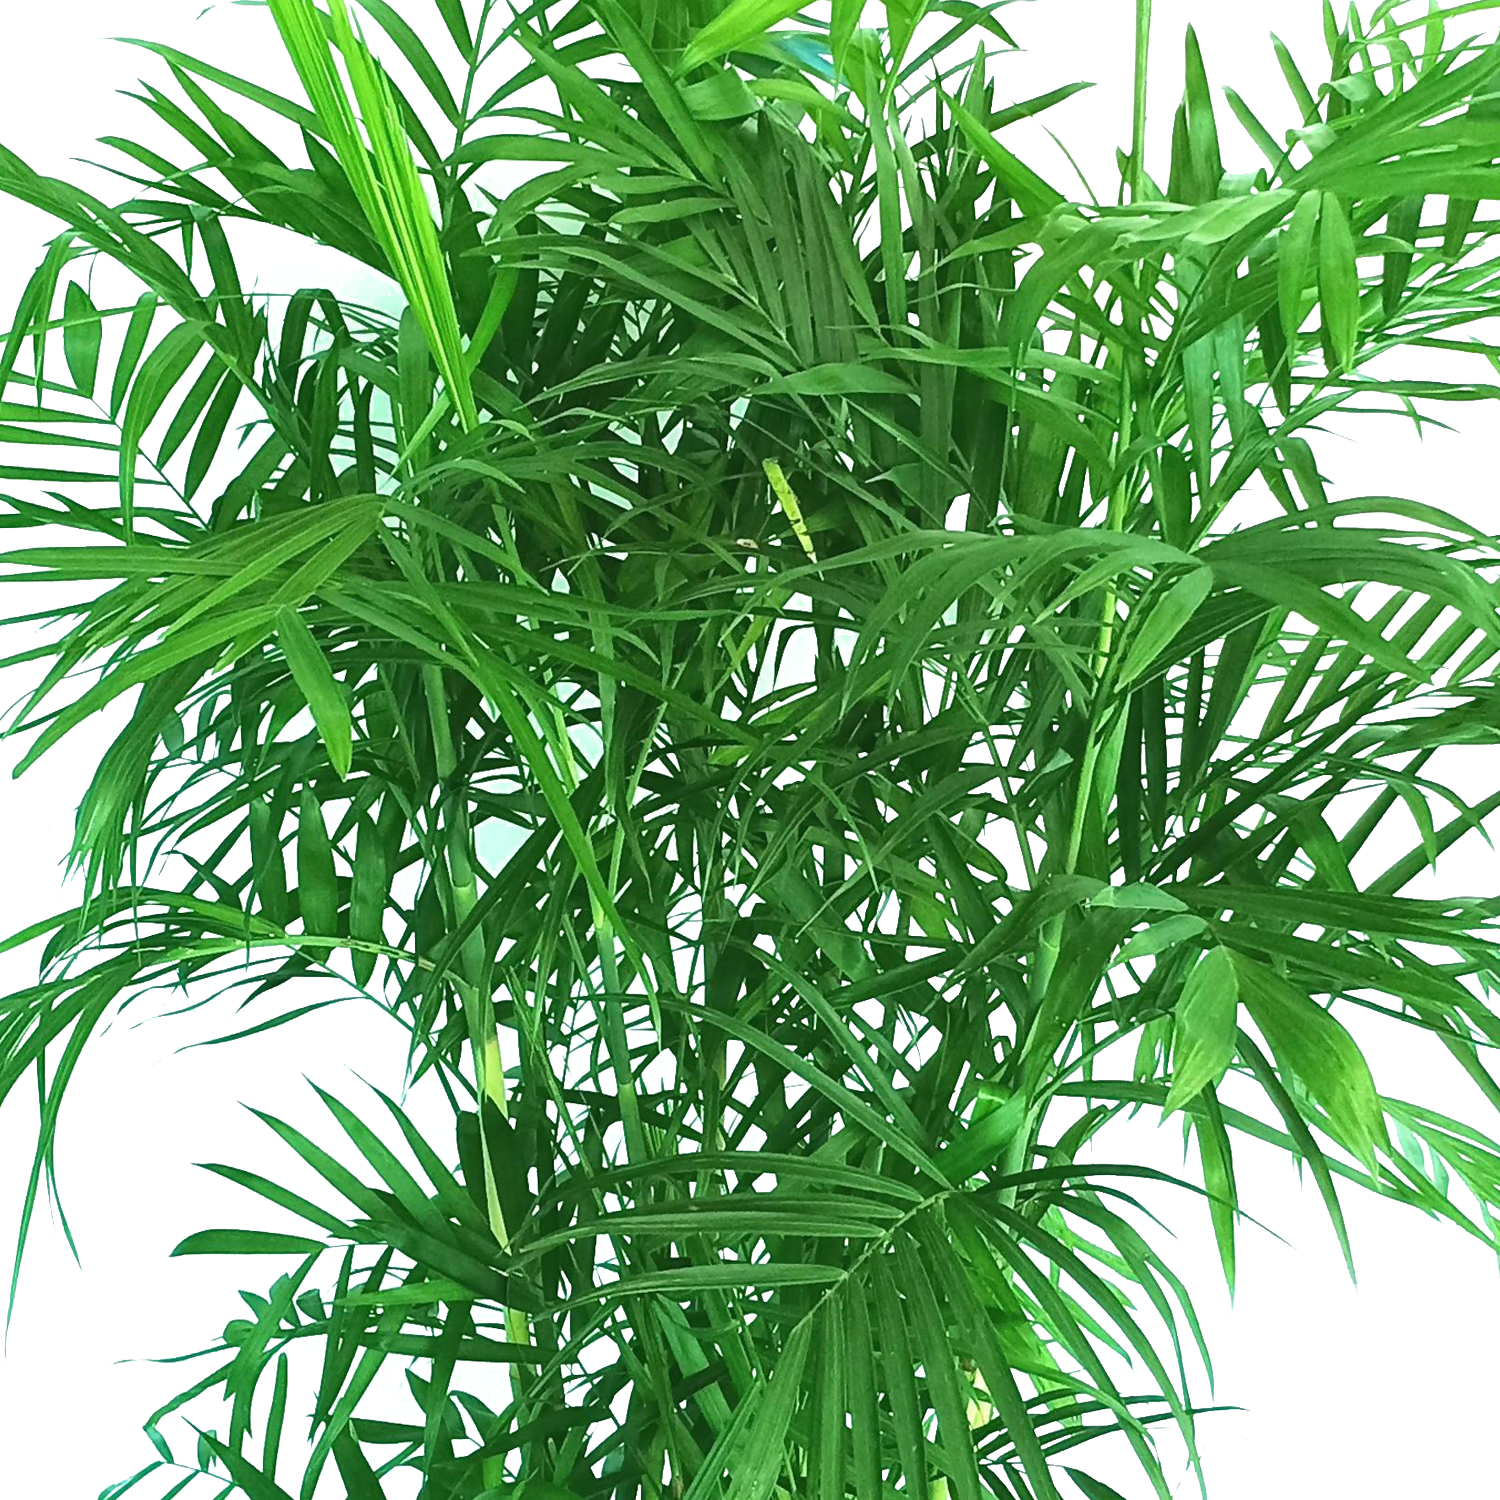 Wekiva Foliage - Bamboo Palm - Live Plant in an 10 inch Growers Pot -Chamaedorea Seifrizii - Beautiful Clean Air Indoor Outdoor Houseplant